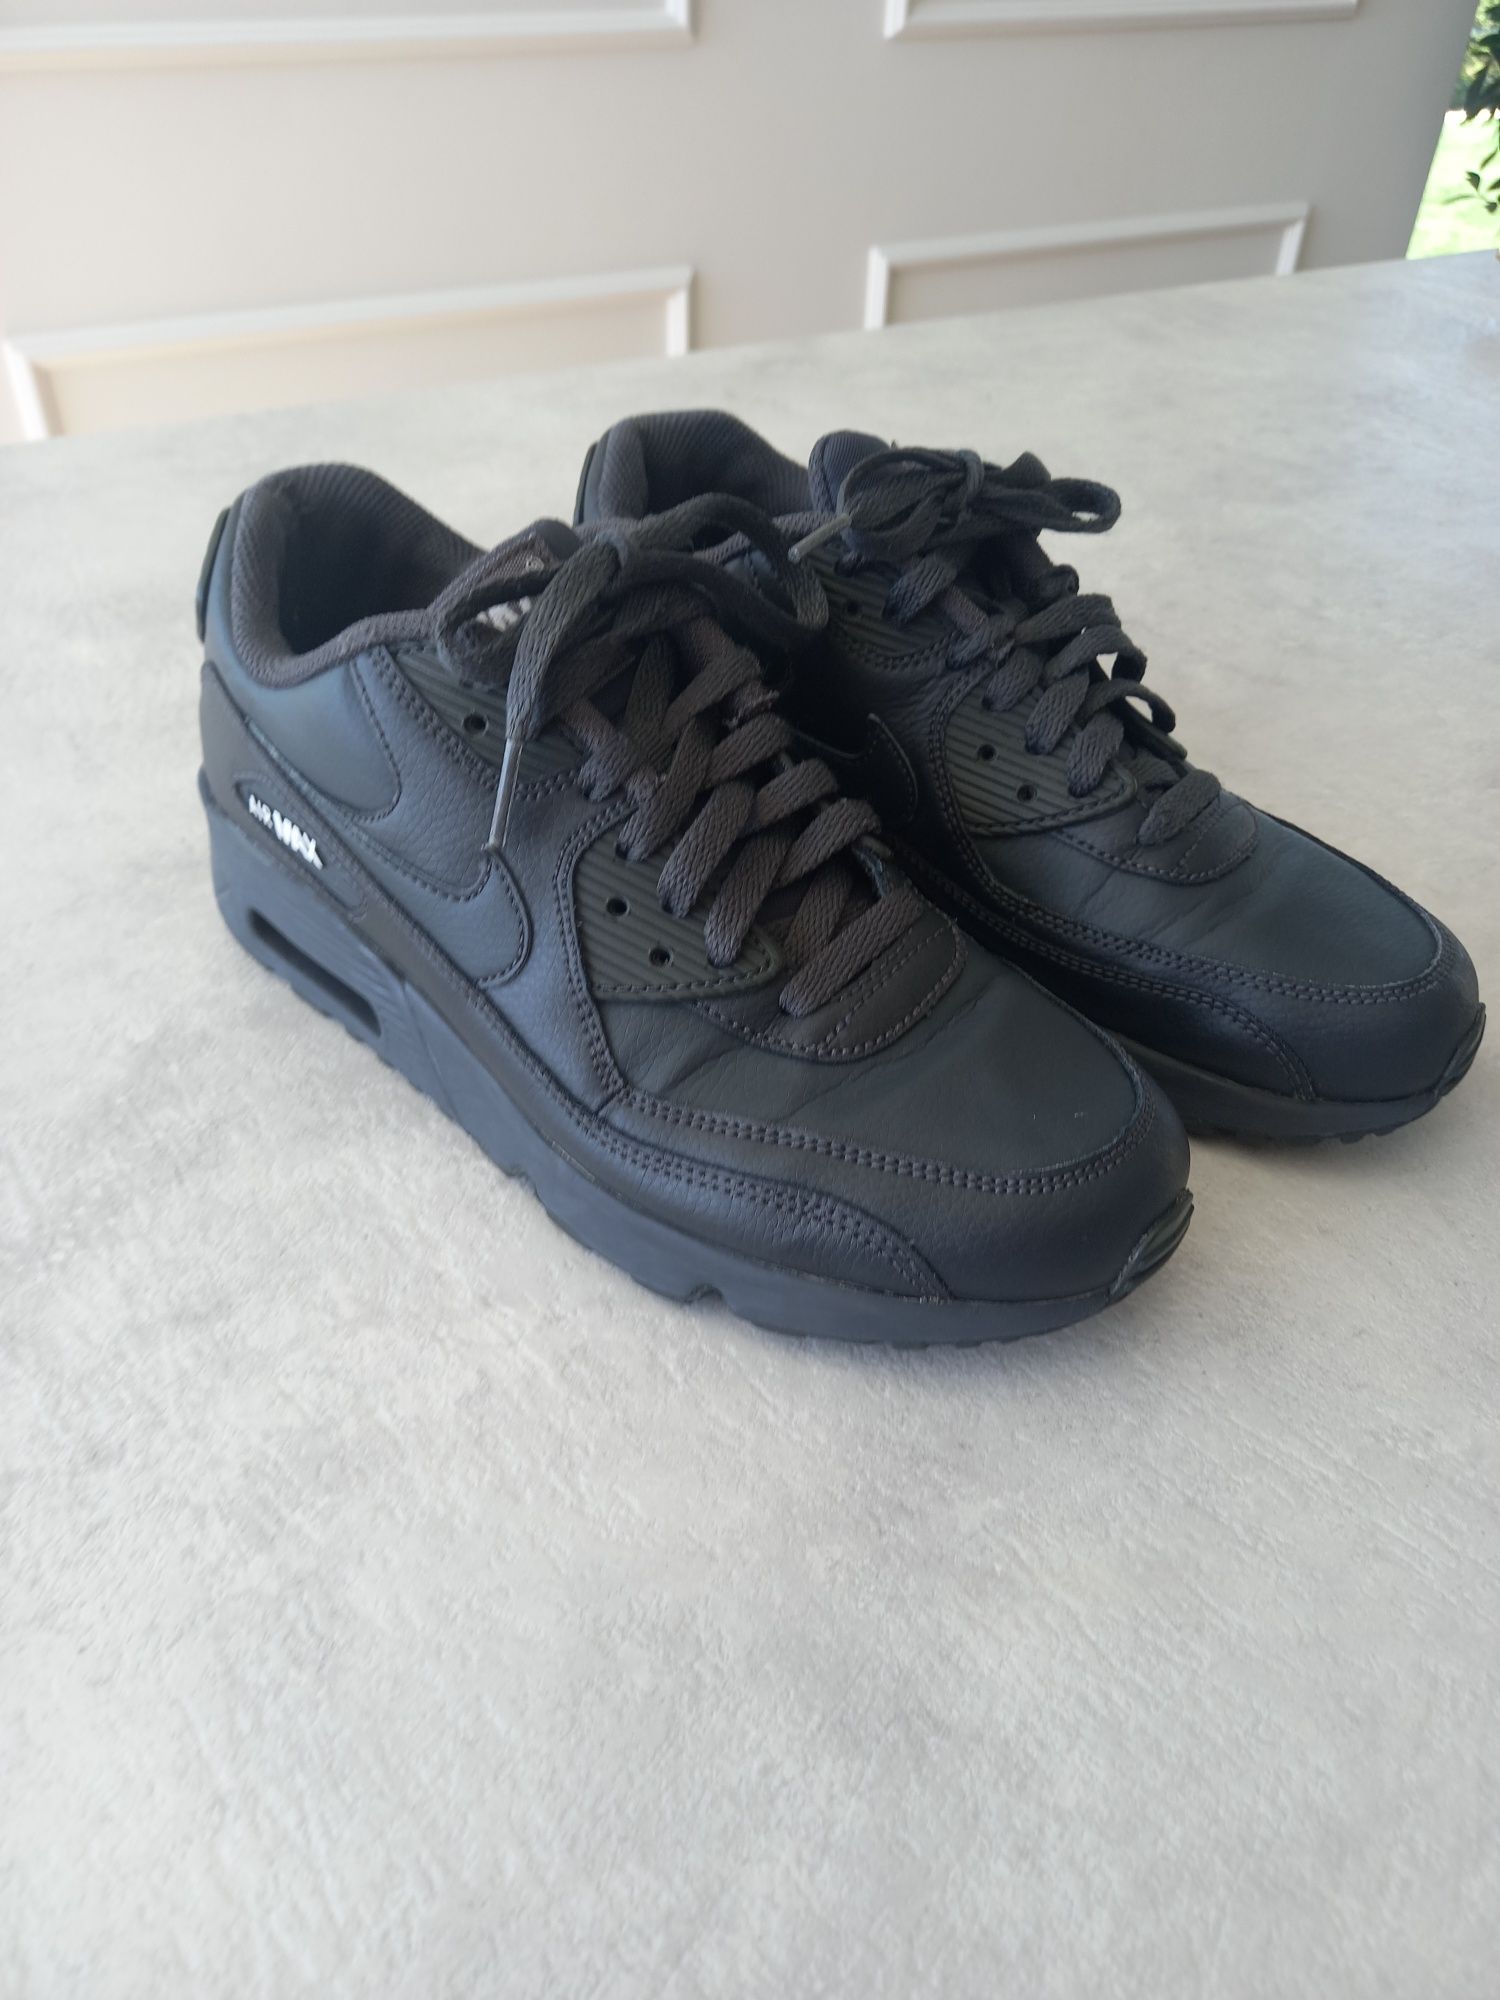 Buty Nike Air Max 90 leather GS rozm. 39